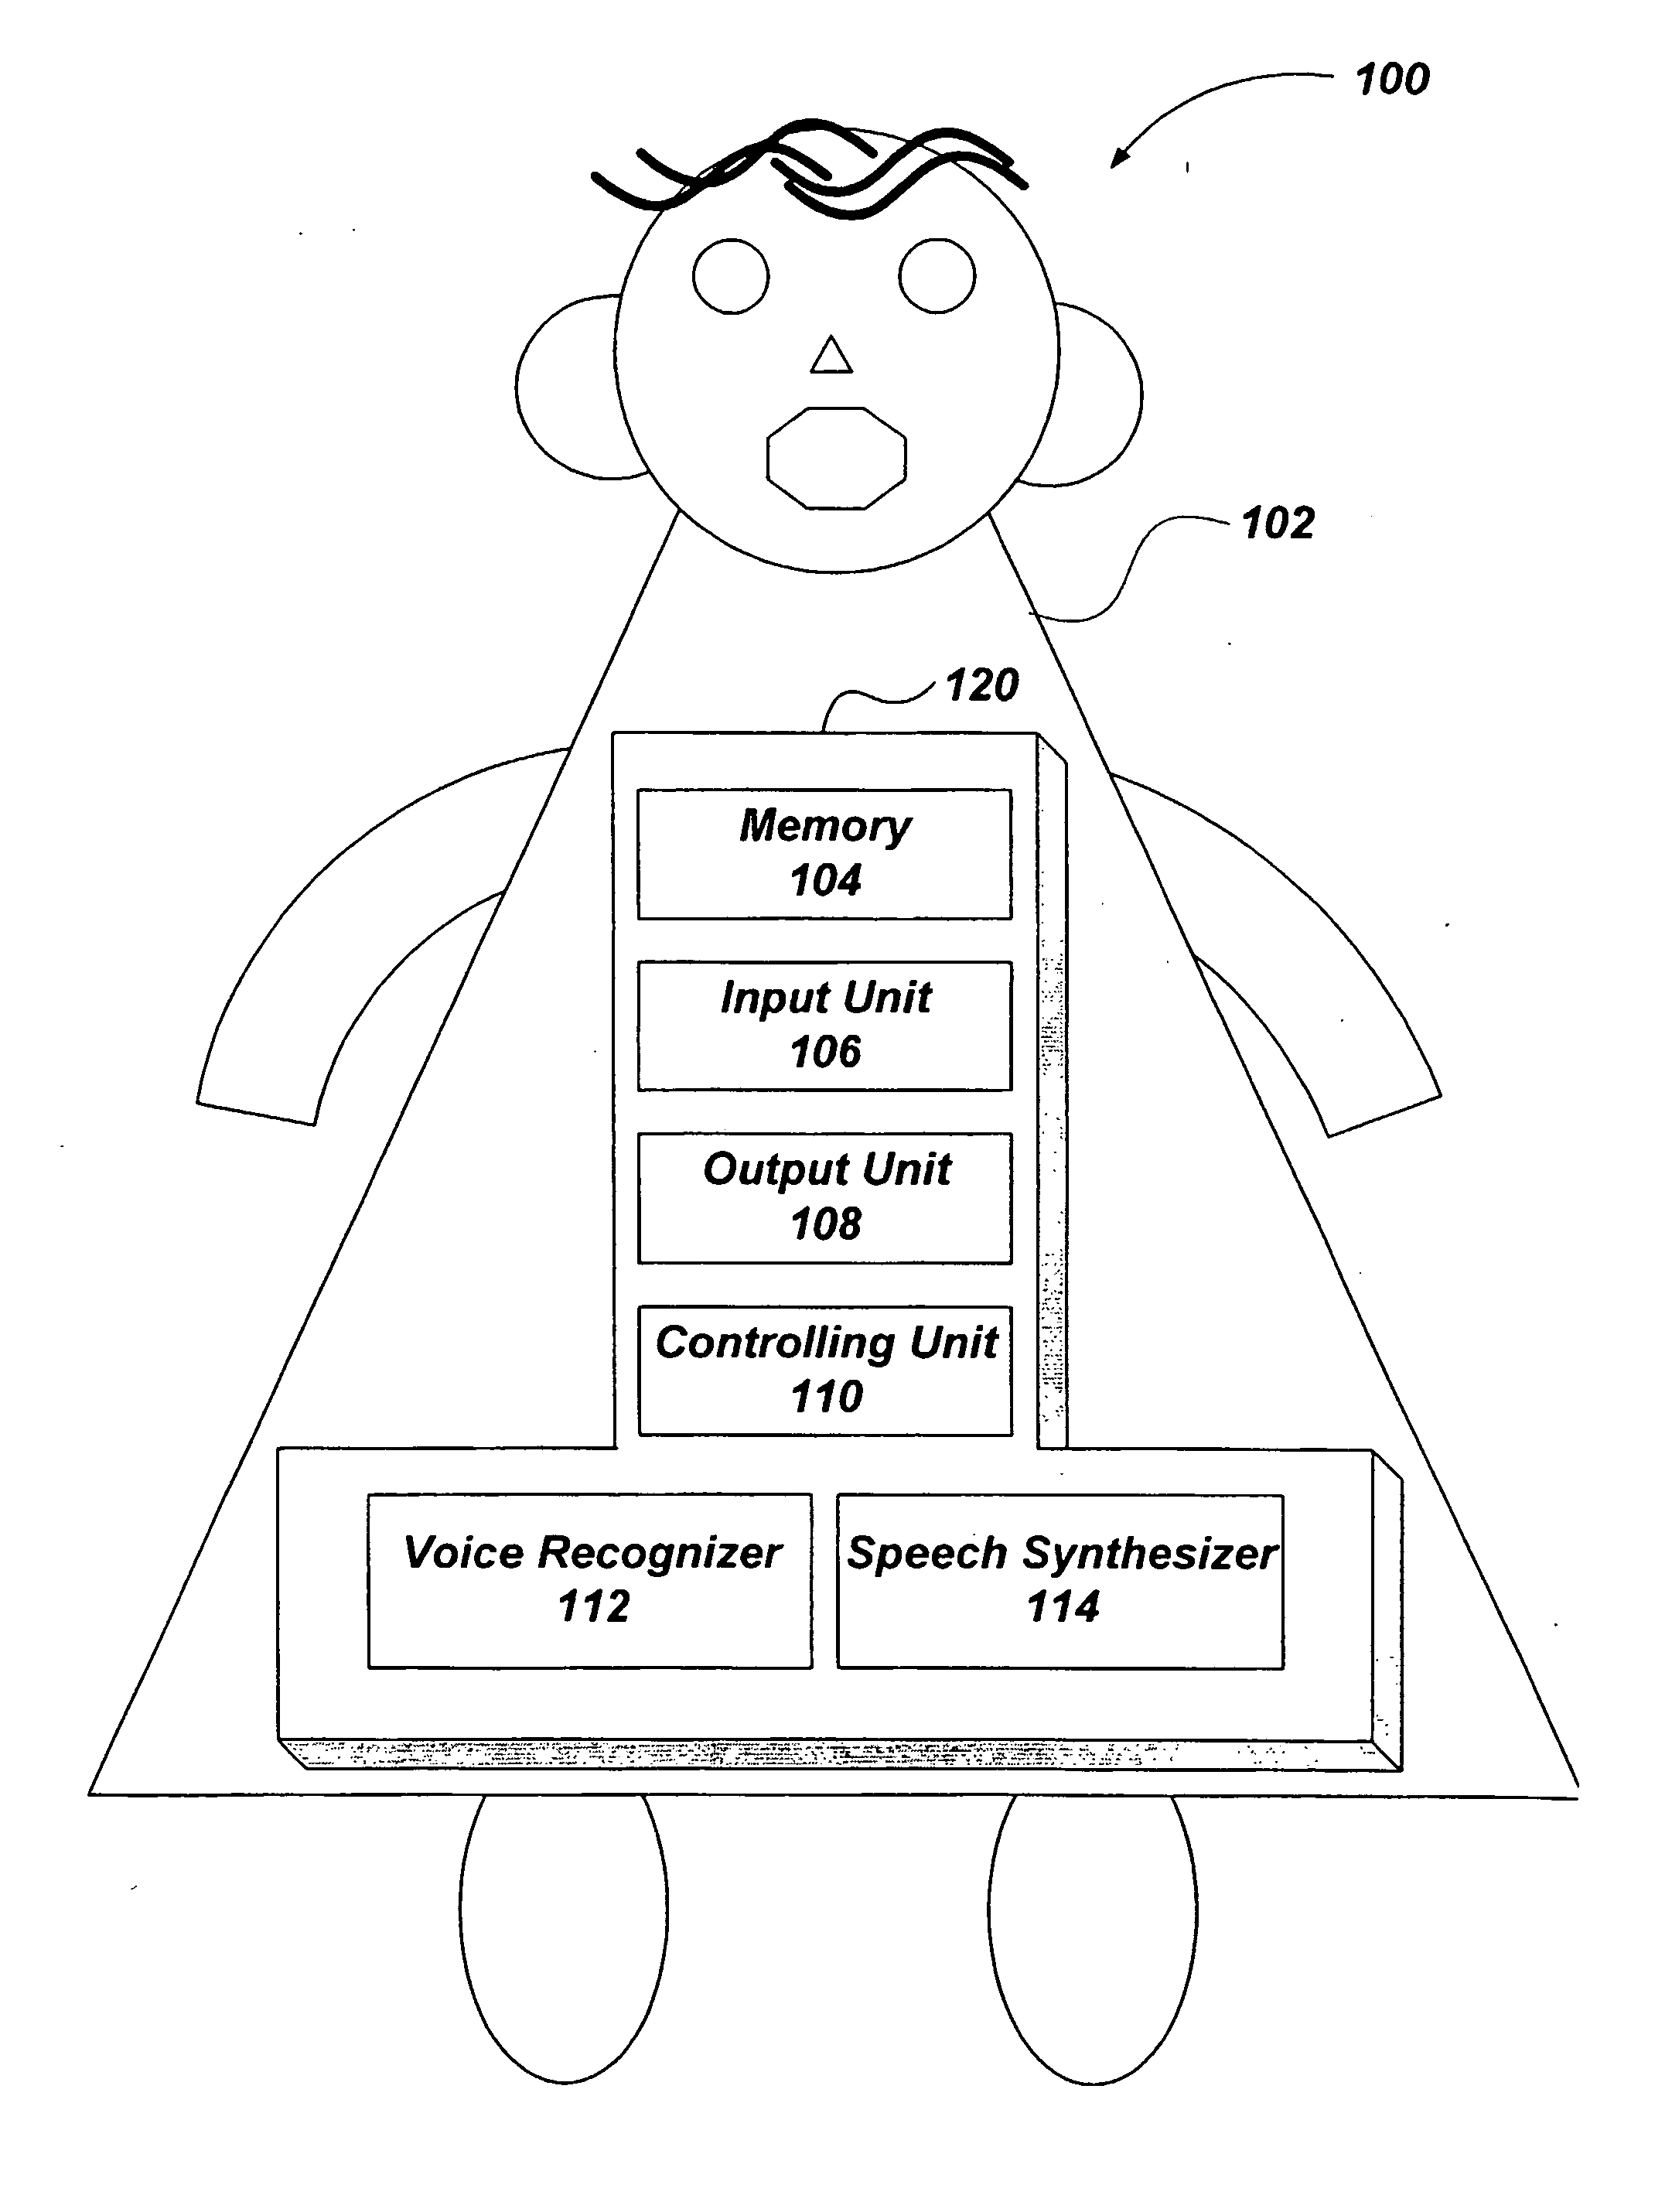 Method and apparatus of simulating and stimulating human speech and teaching humans how to talk